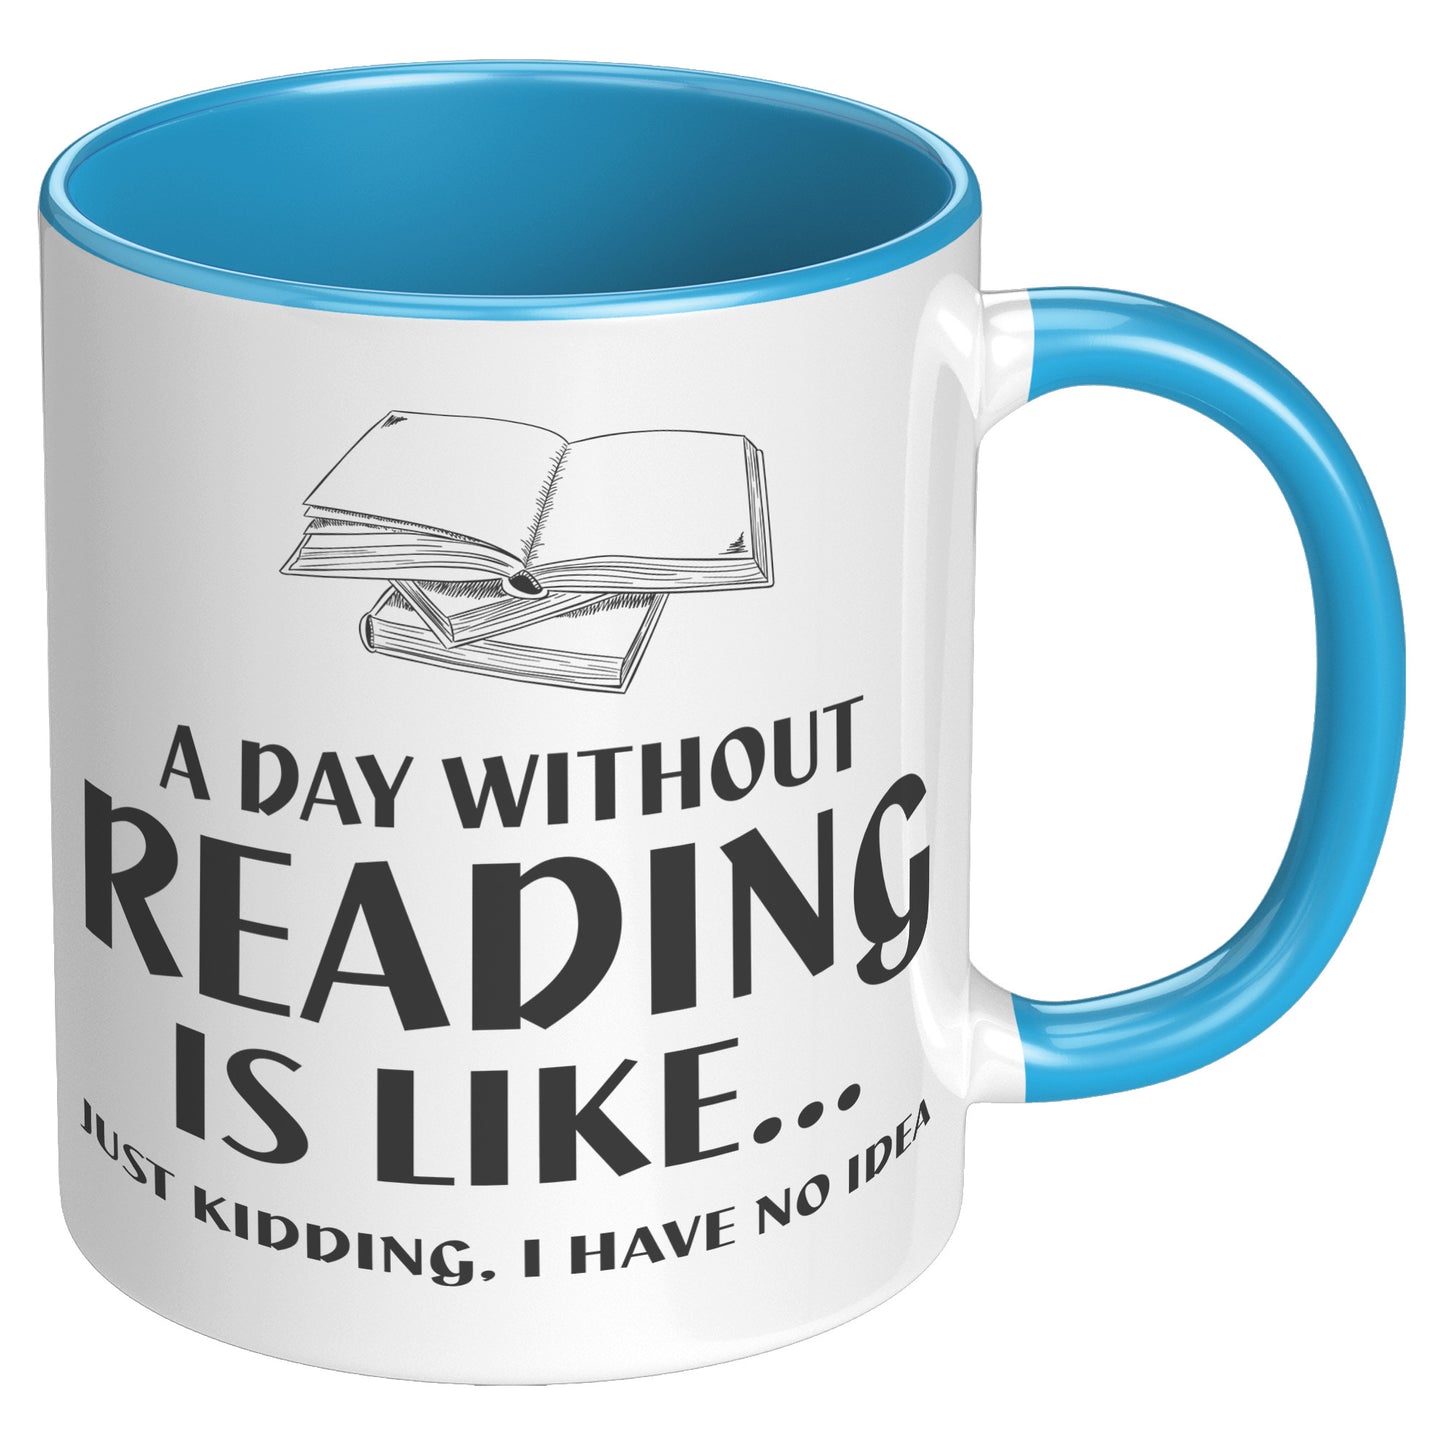 A Day Without Reading Is Like... Just Kidding, I Have No Idea | Accent Mug